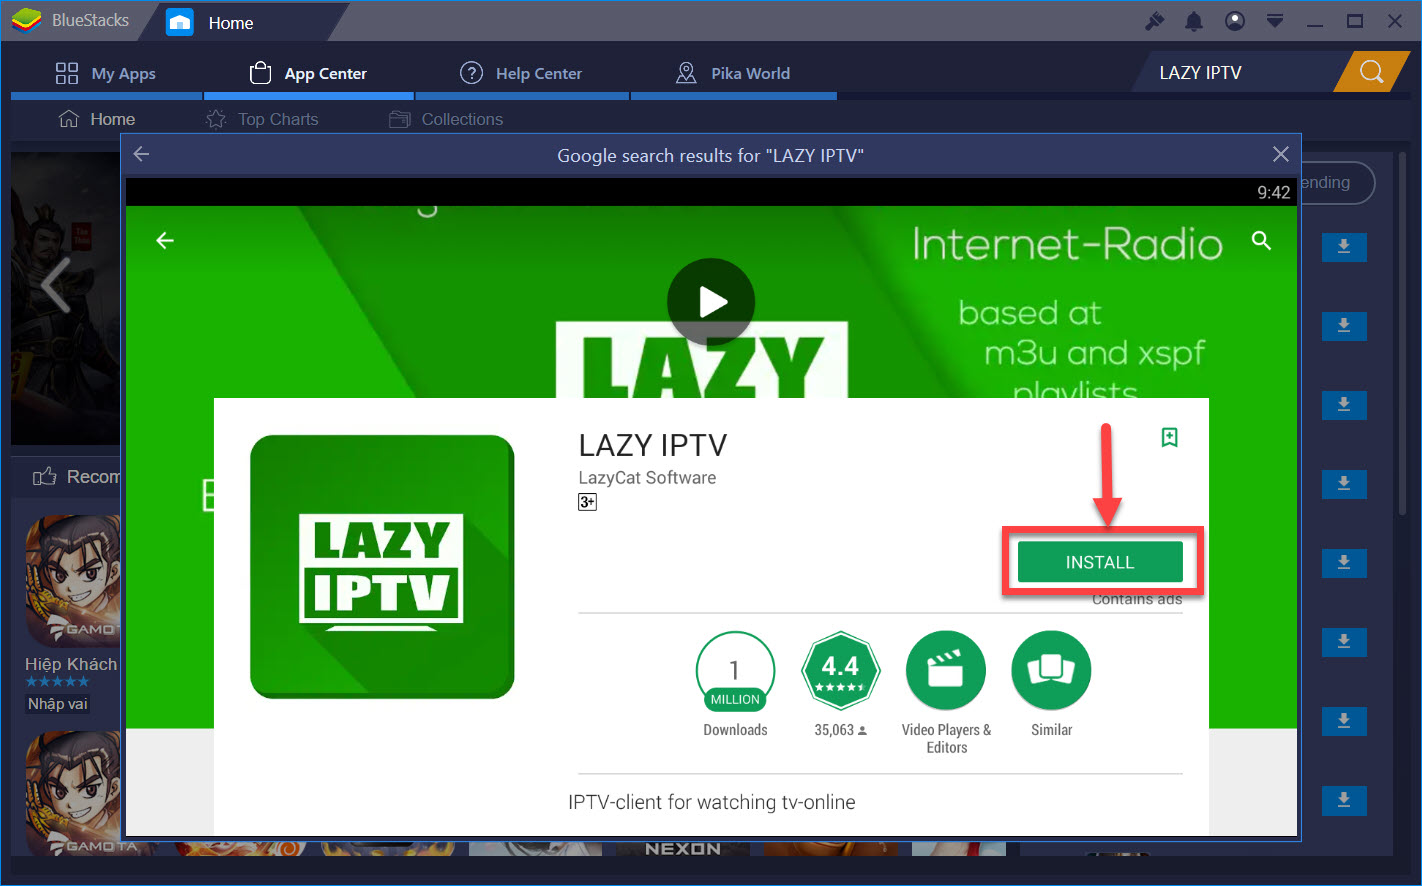 Download LAZY IPTV For PC